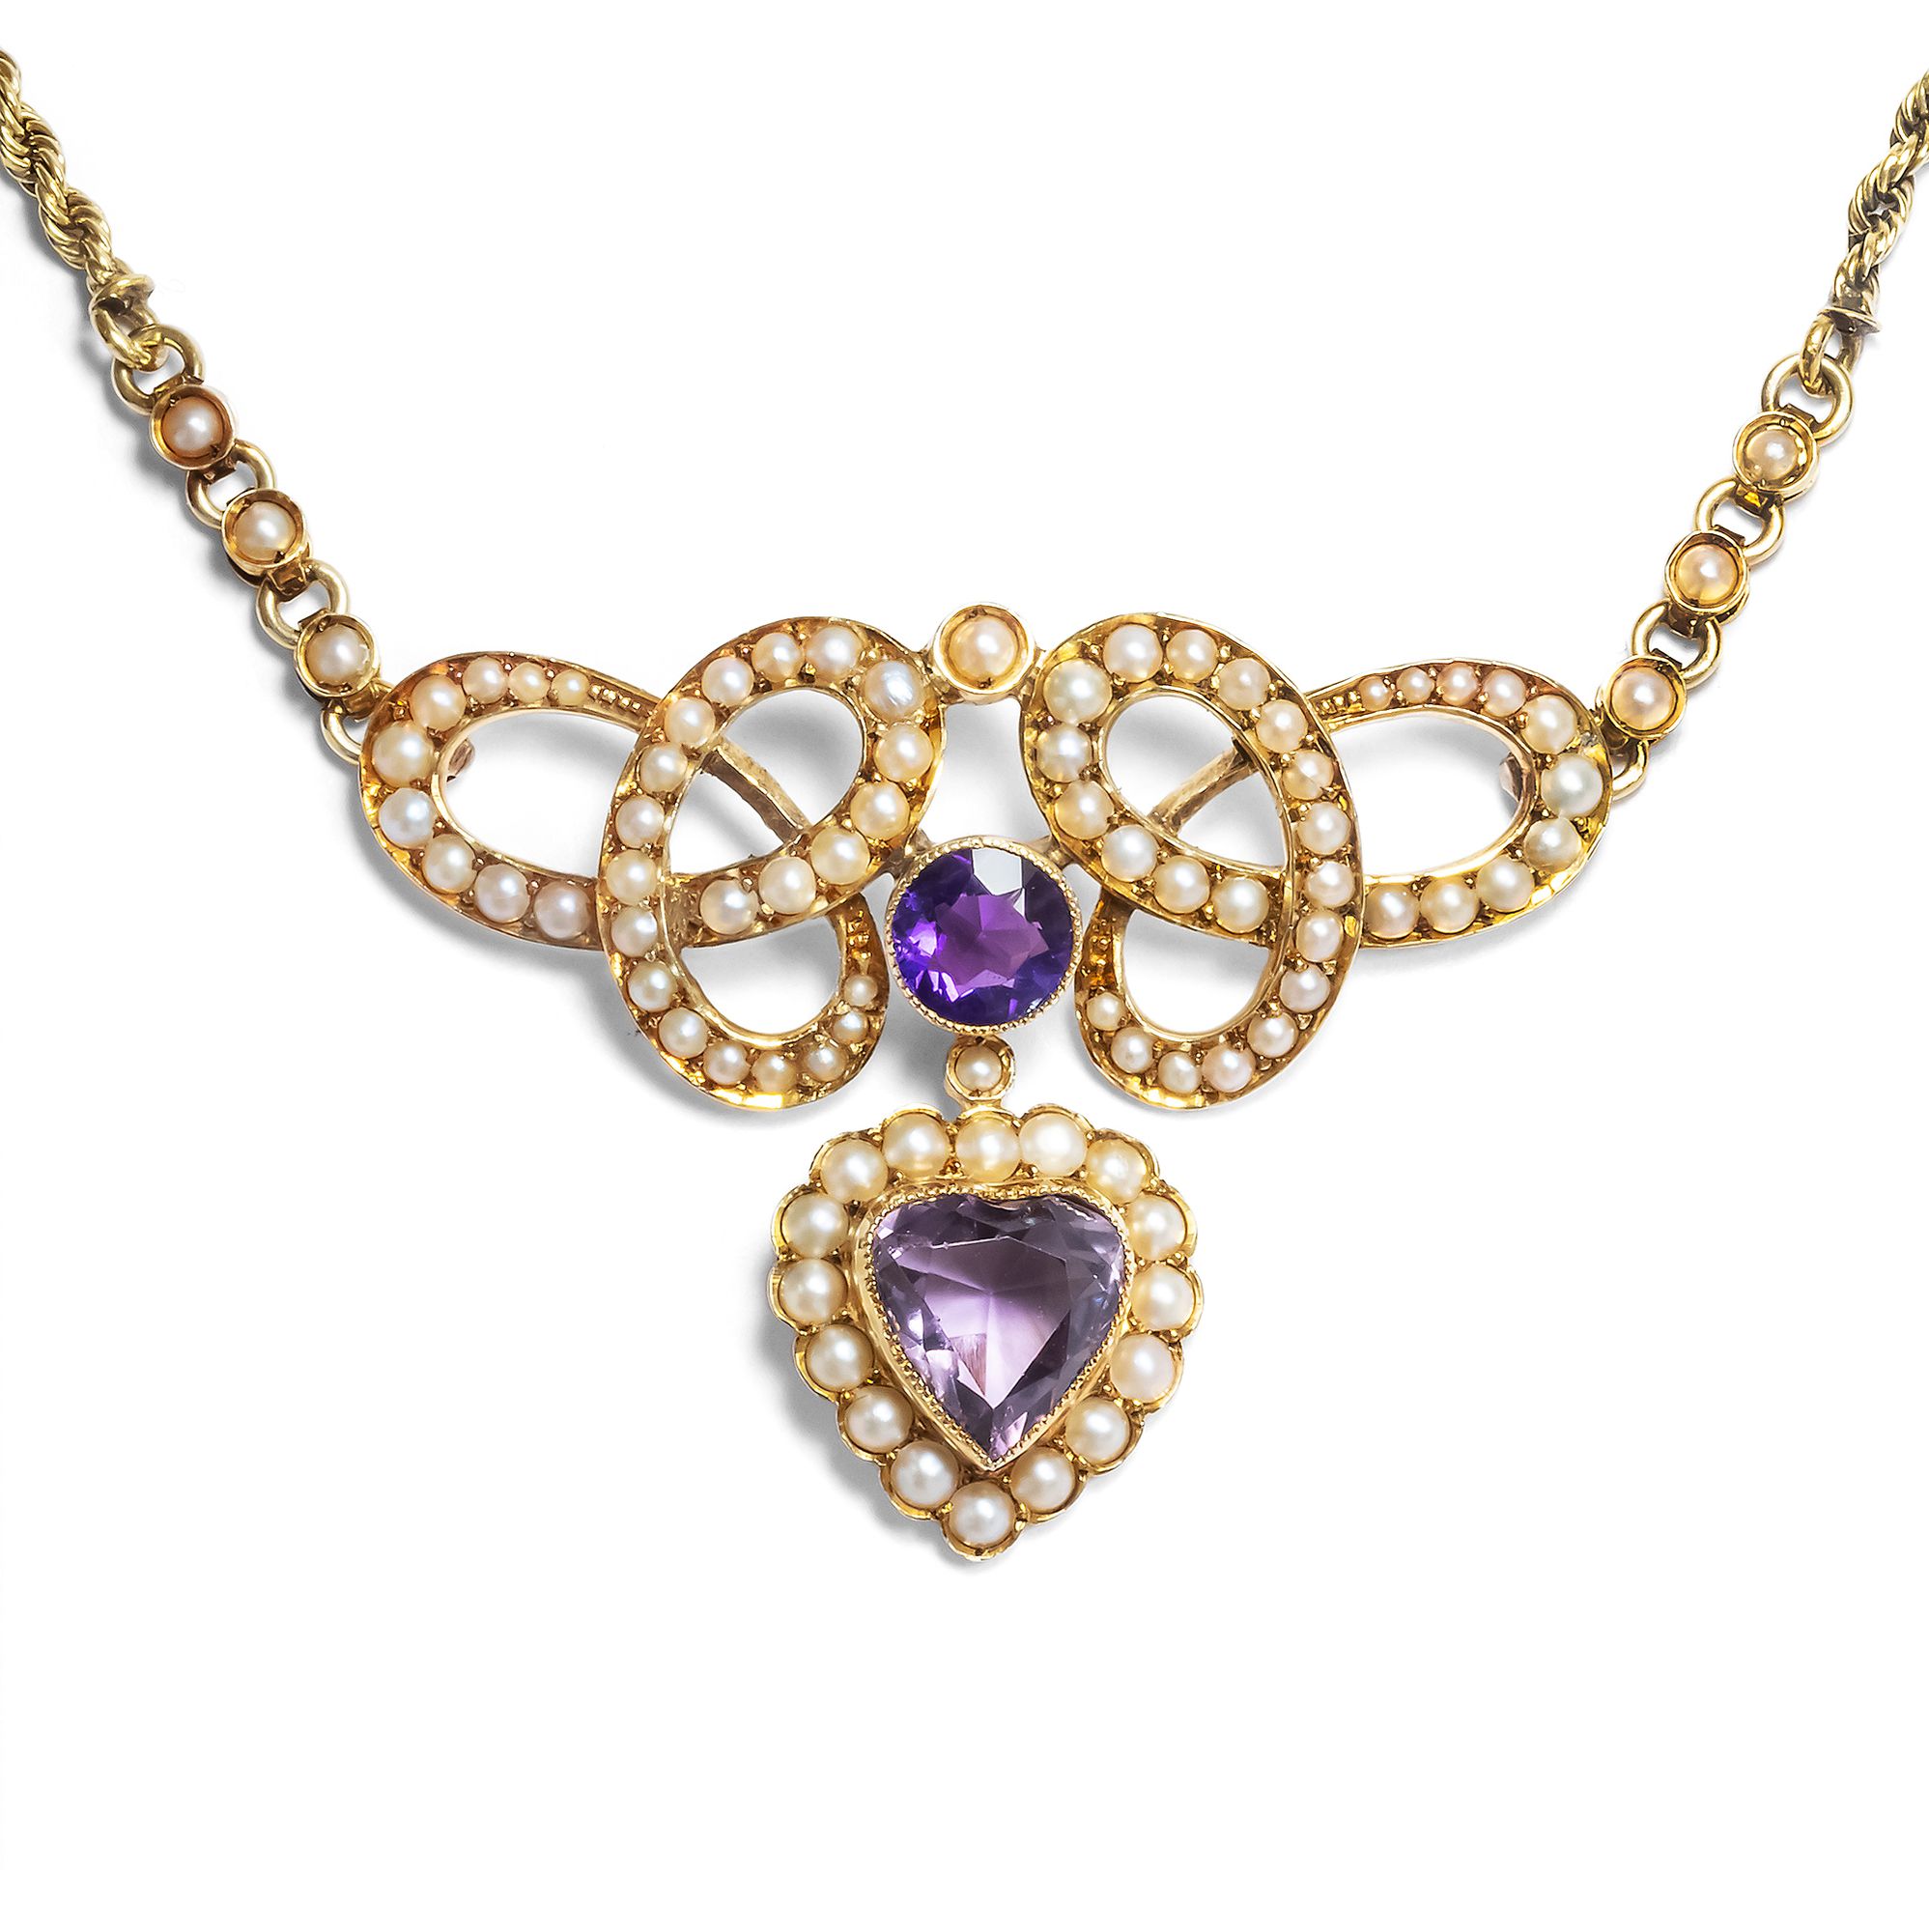 Romantic Gold Necklace with Amethysts & Pearls, Great Britain c. 1900